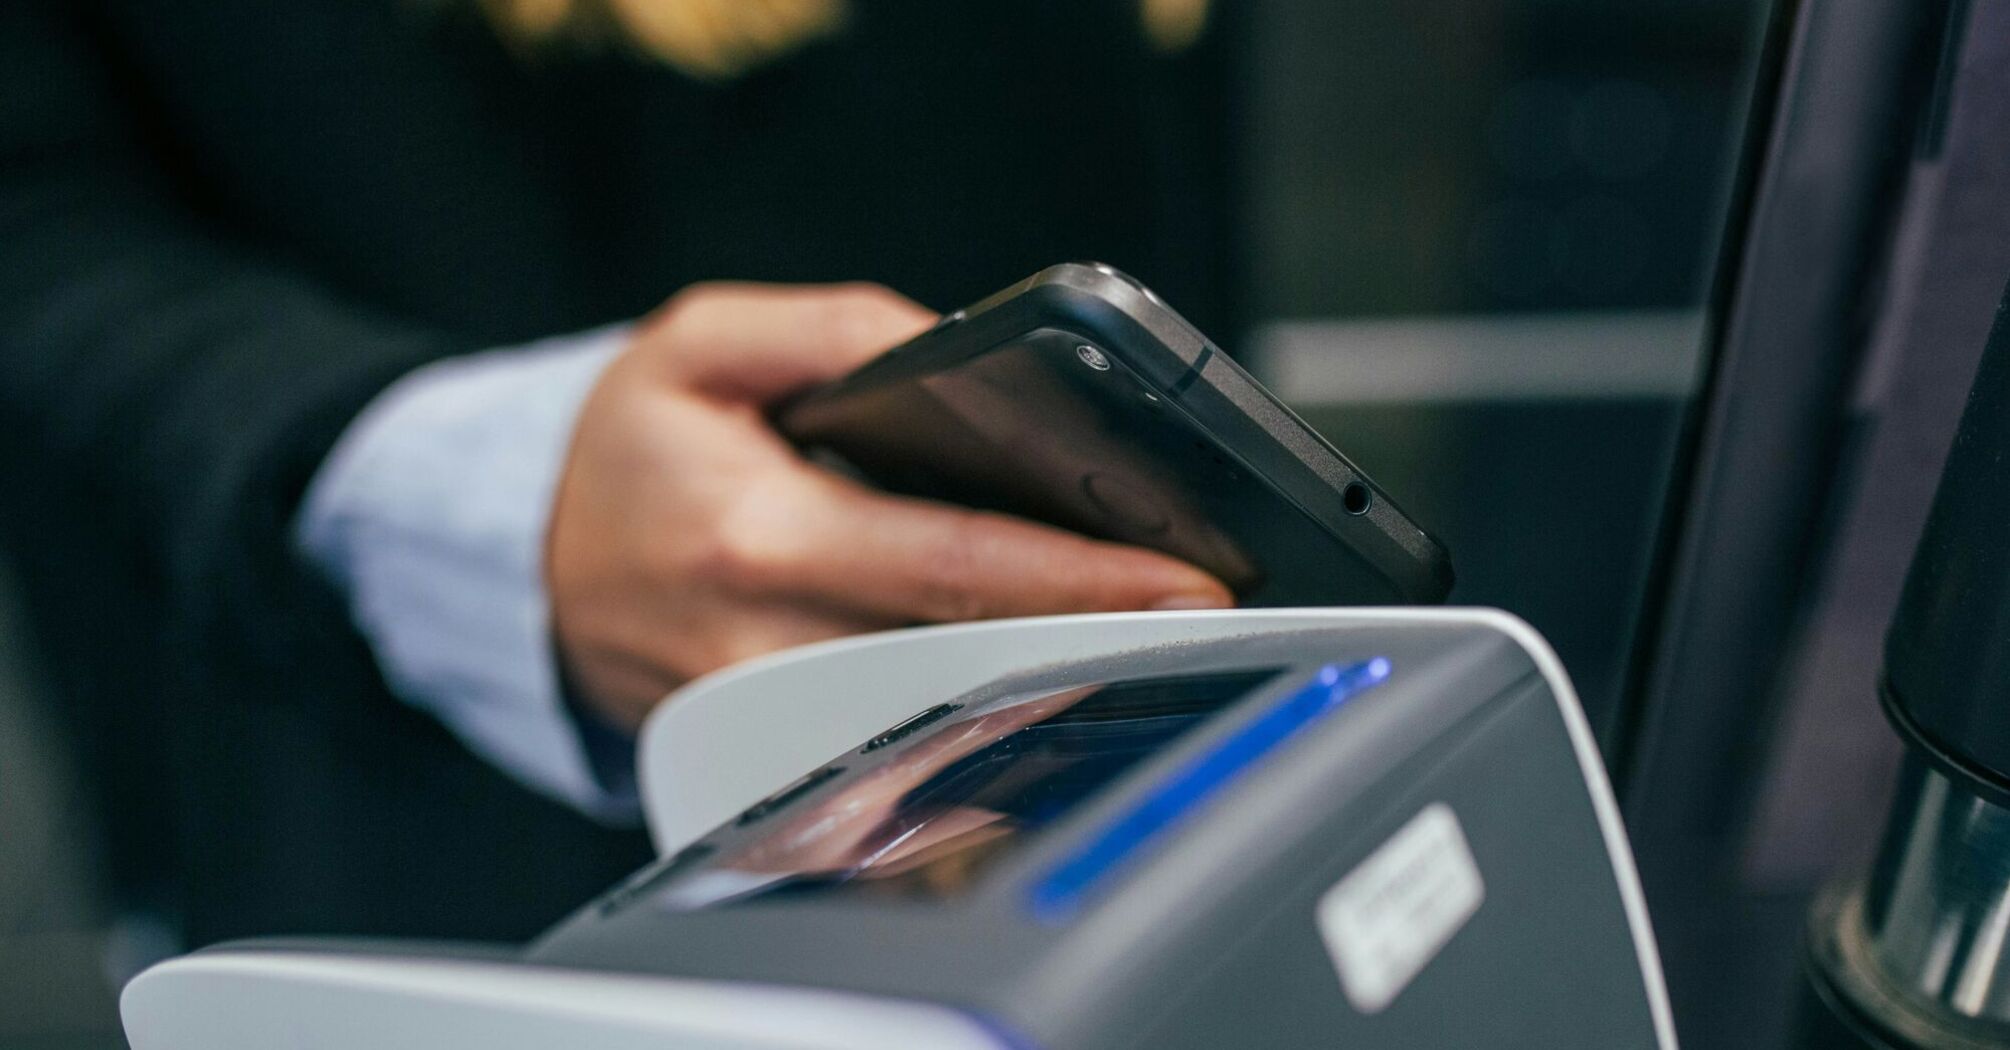 A person shirt is holding a smartphone over a contactless payment terminal